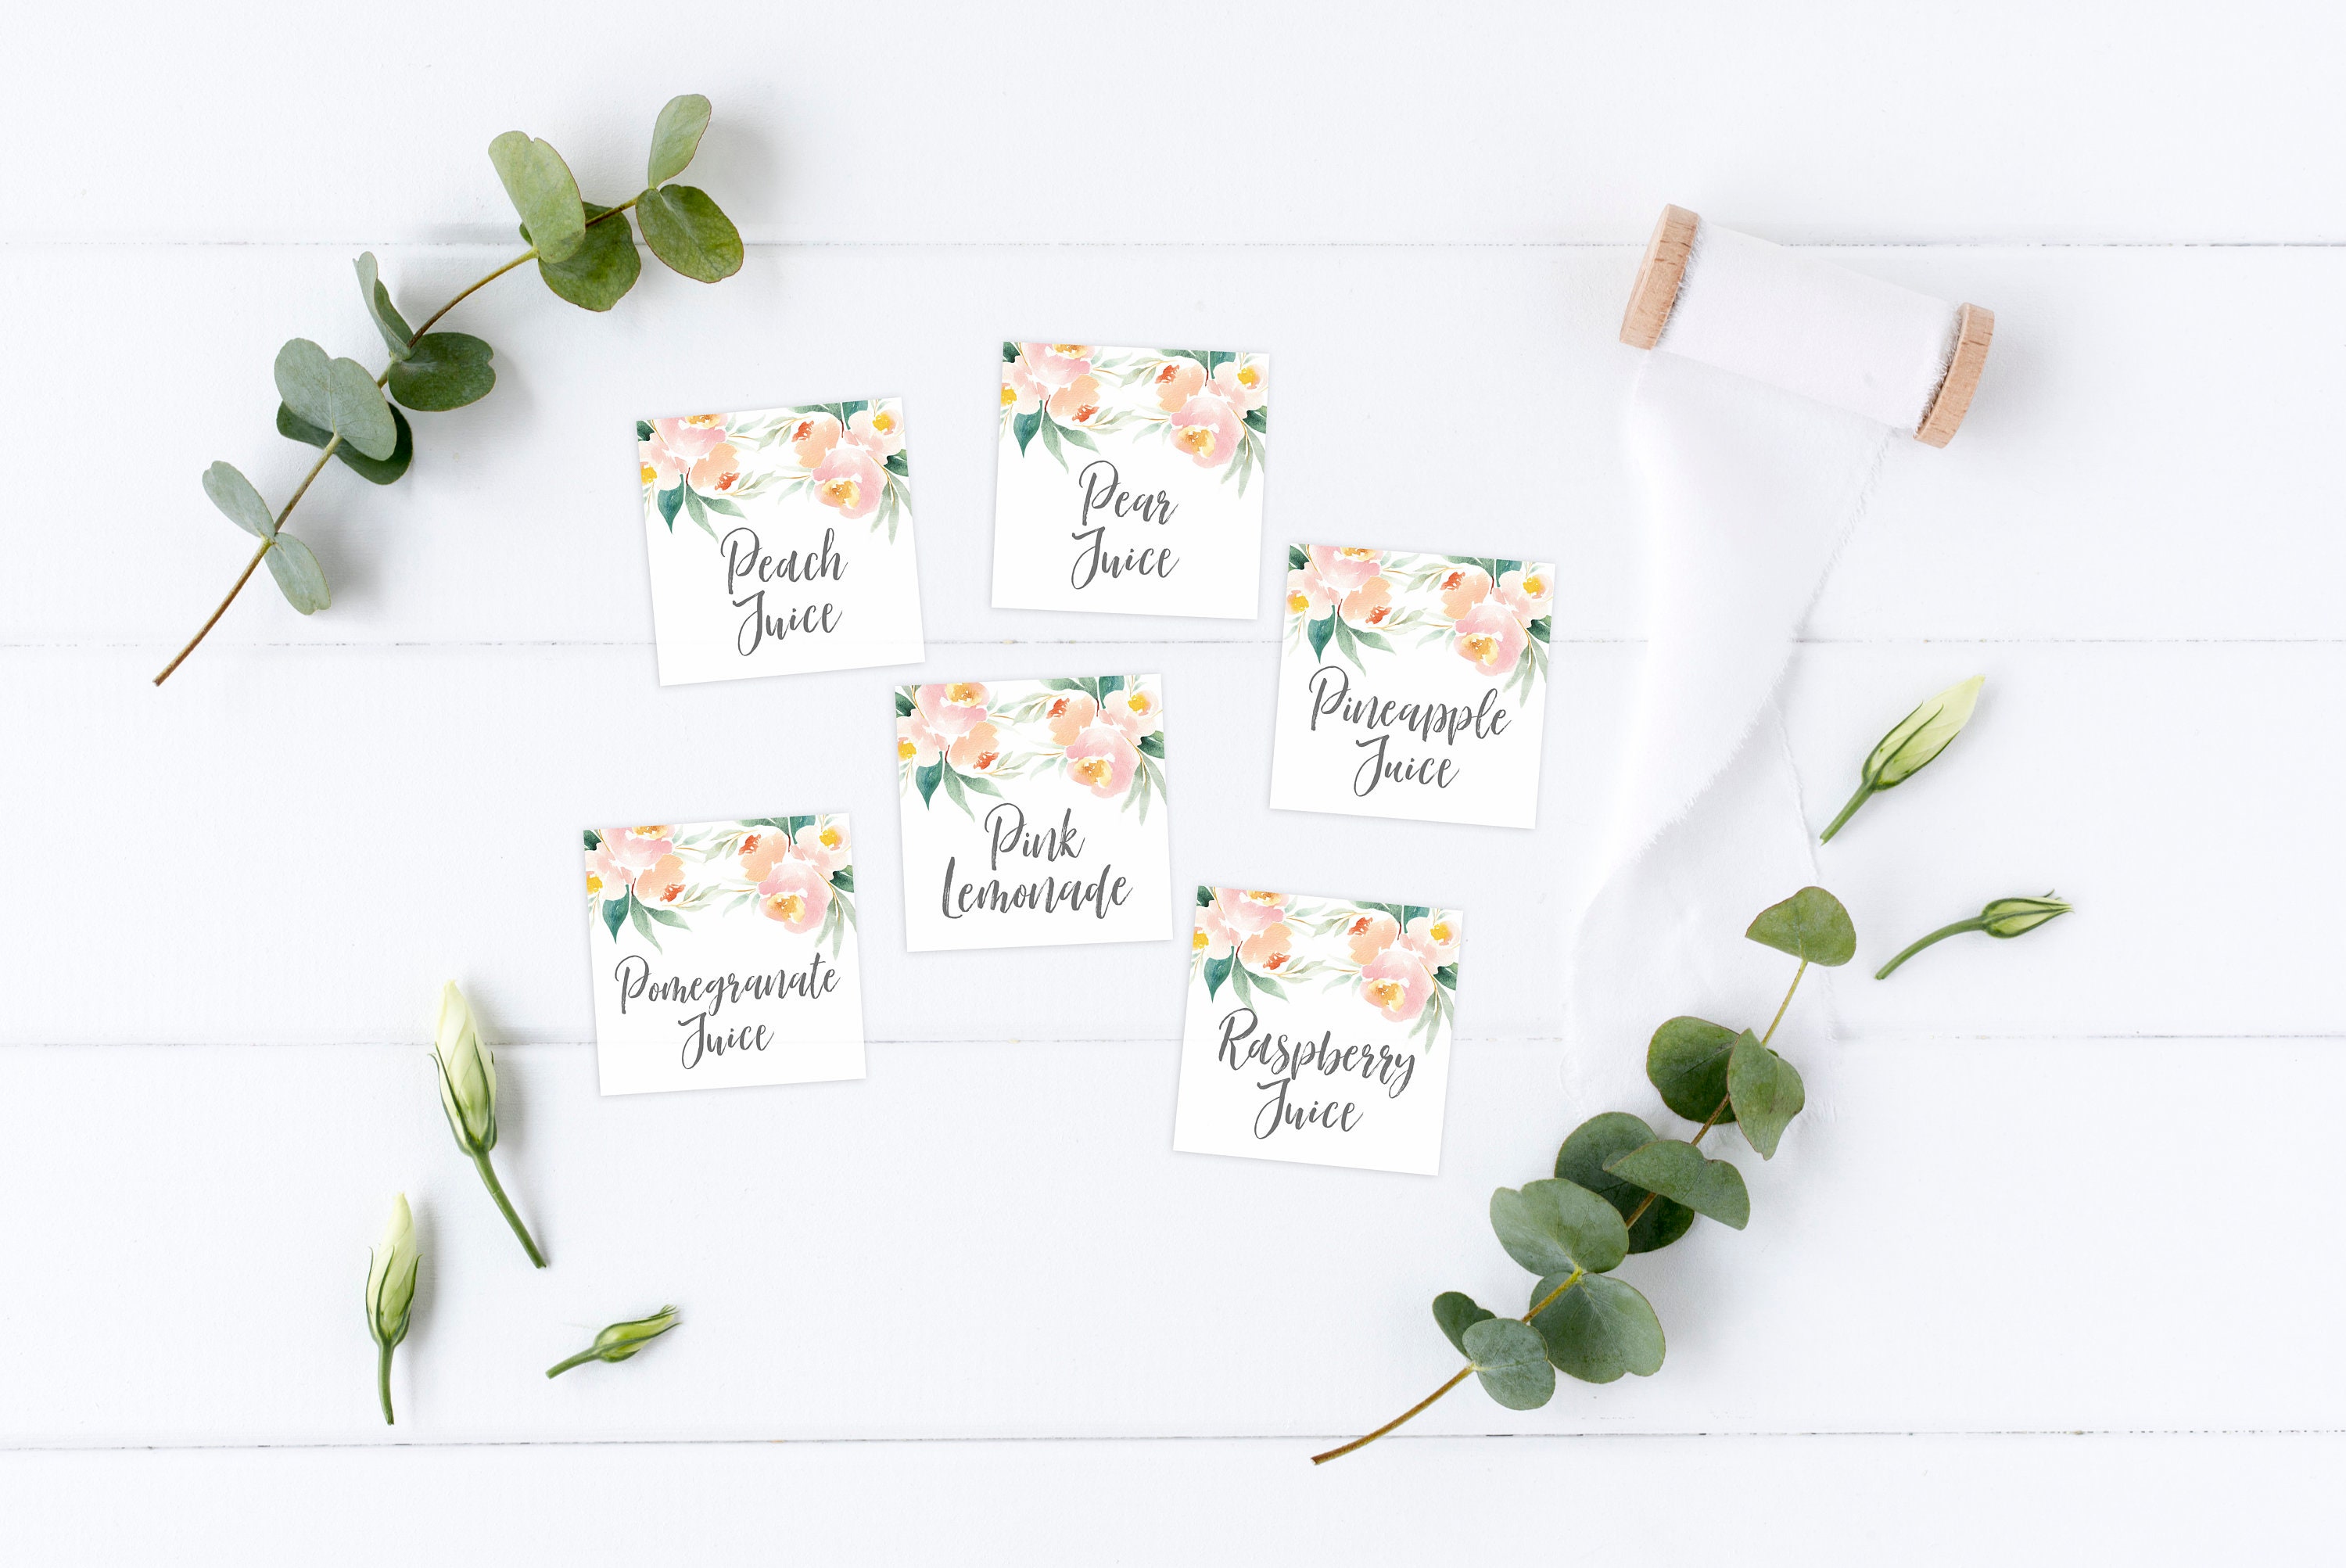 Afternoon Blooms  Printable Mimosa Bar Sign and Juice Tags